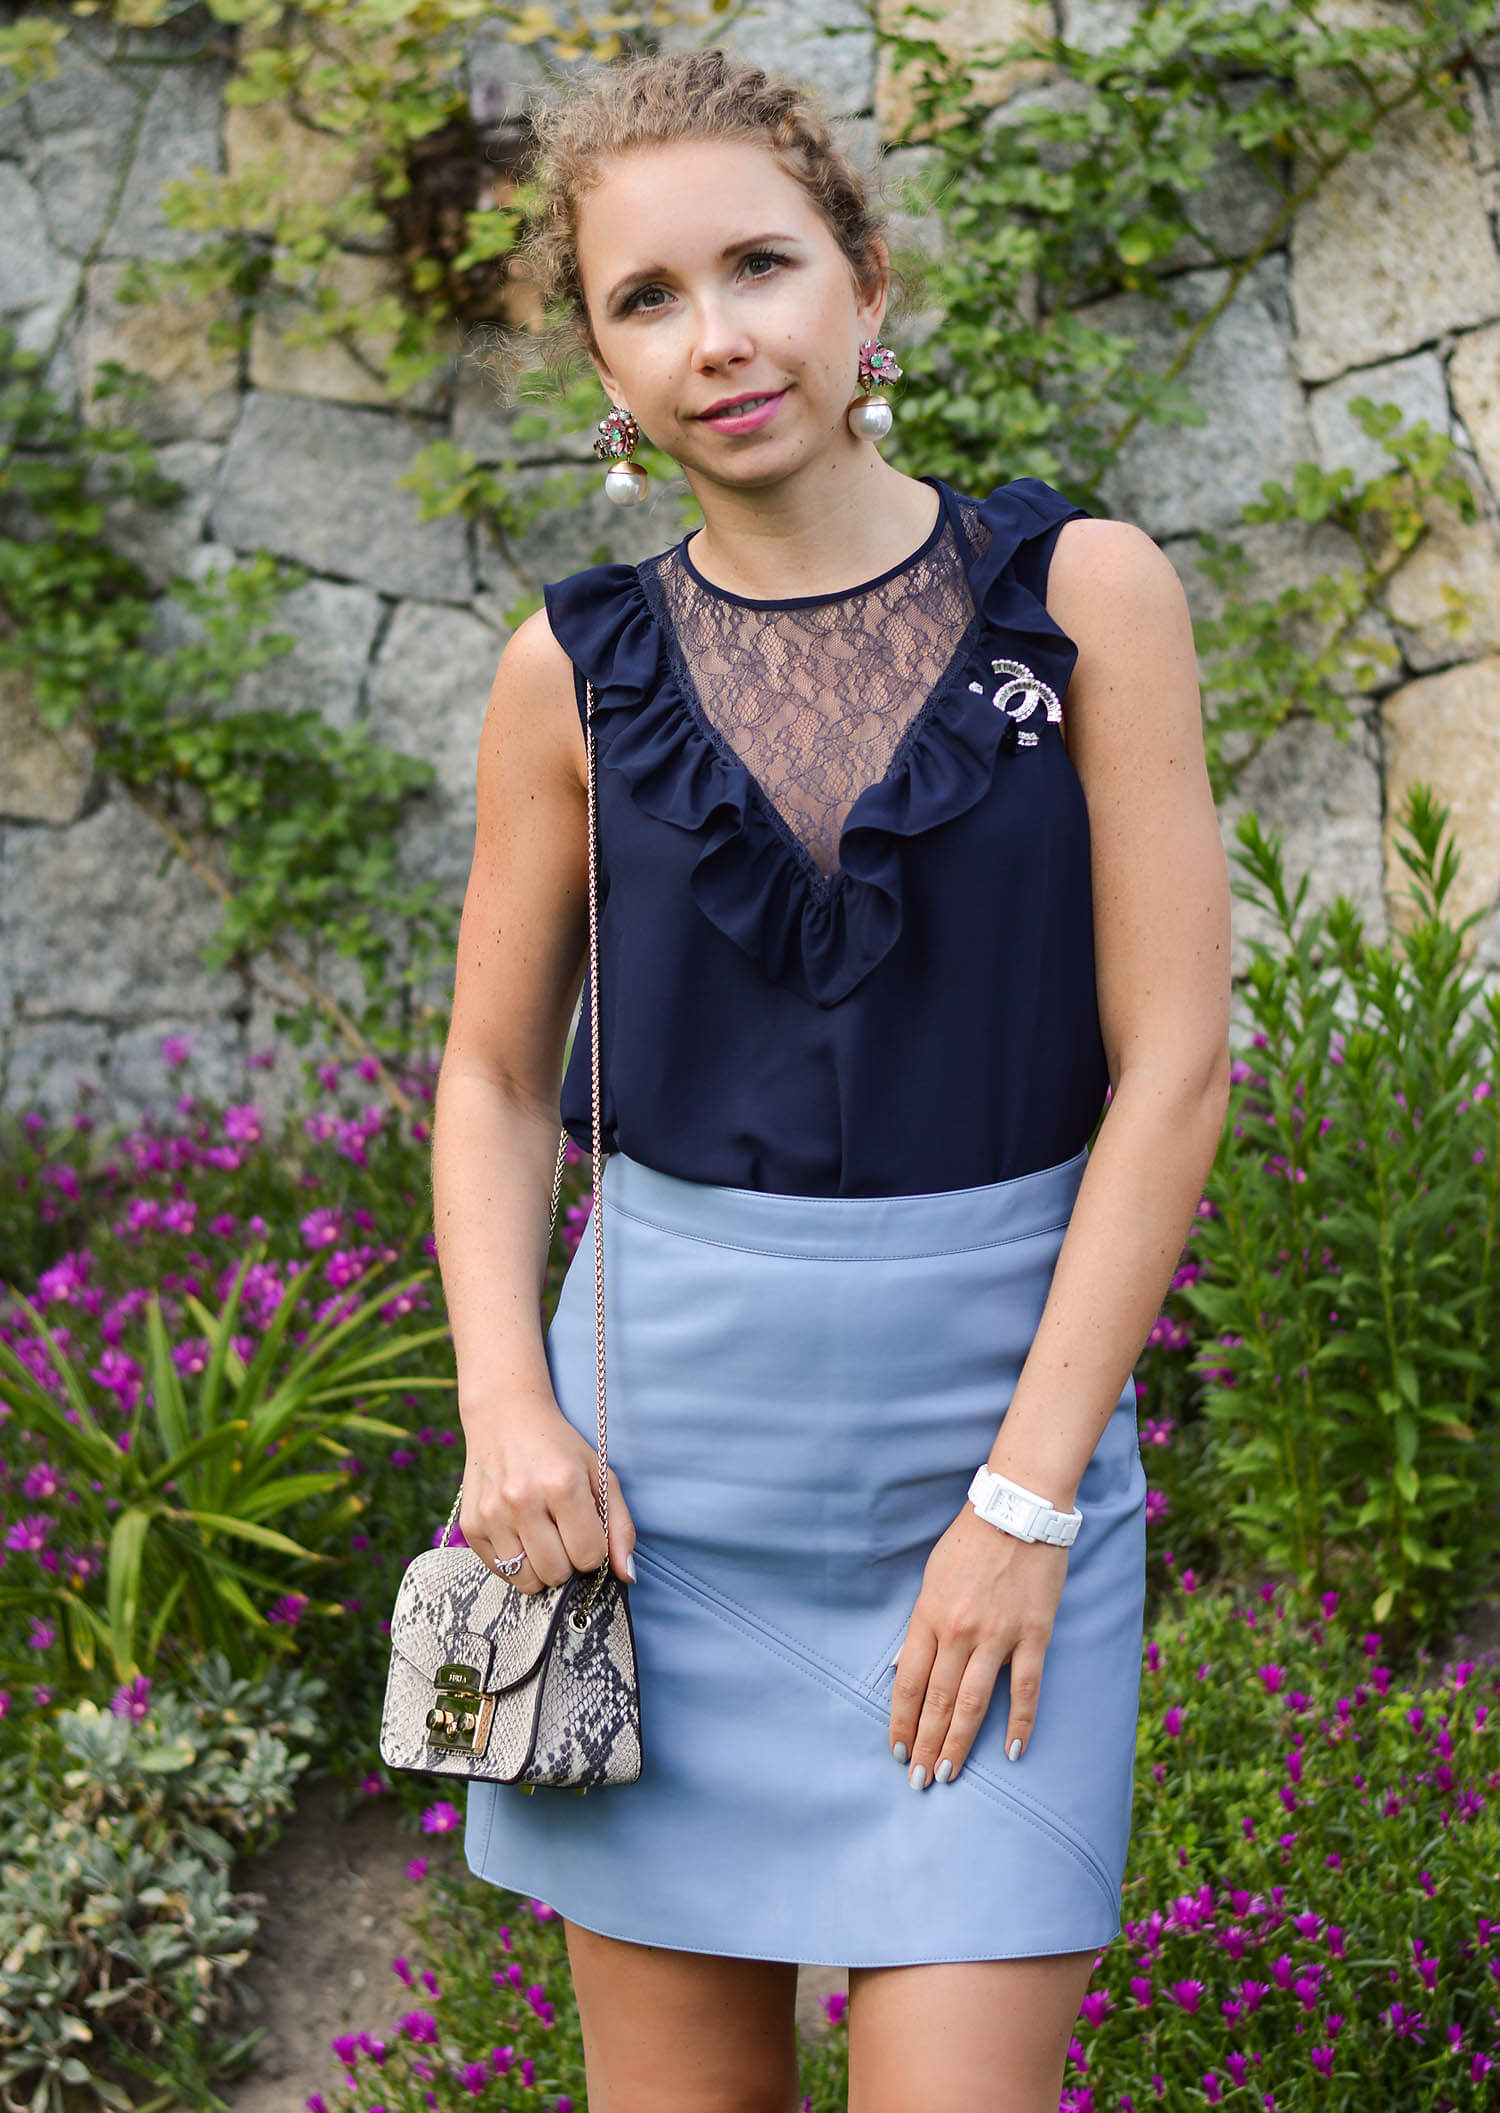 Kationette-fashionblog-nrw-Outfit-Blue-Lace-Top-Leather-Skirt-Furla-Bag-South-Tyrol